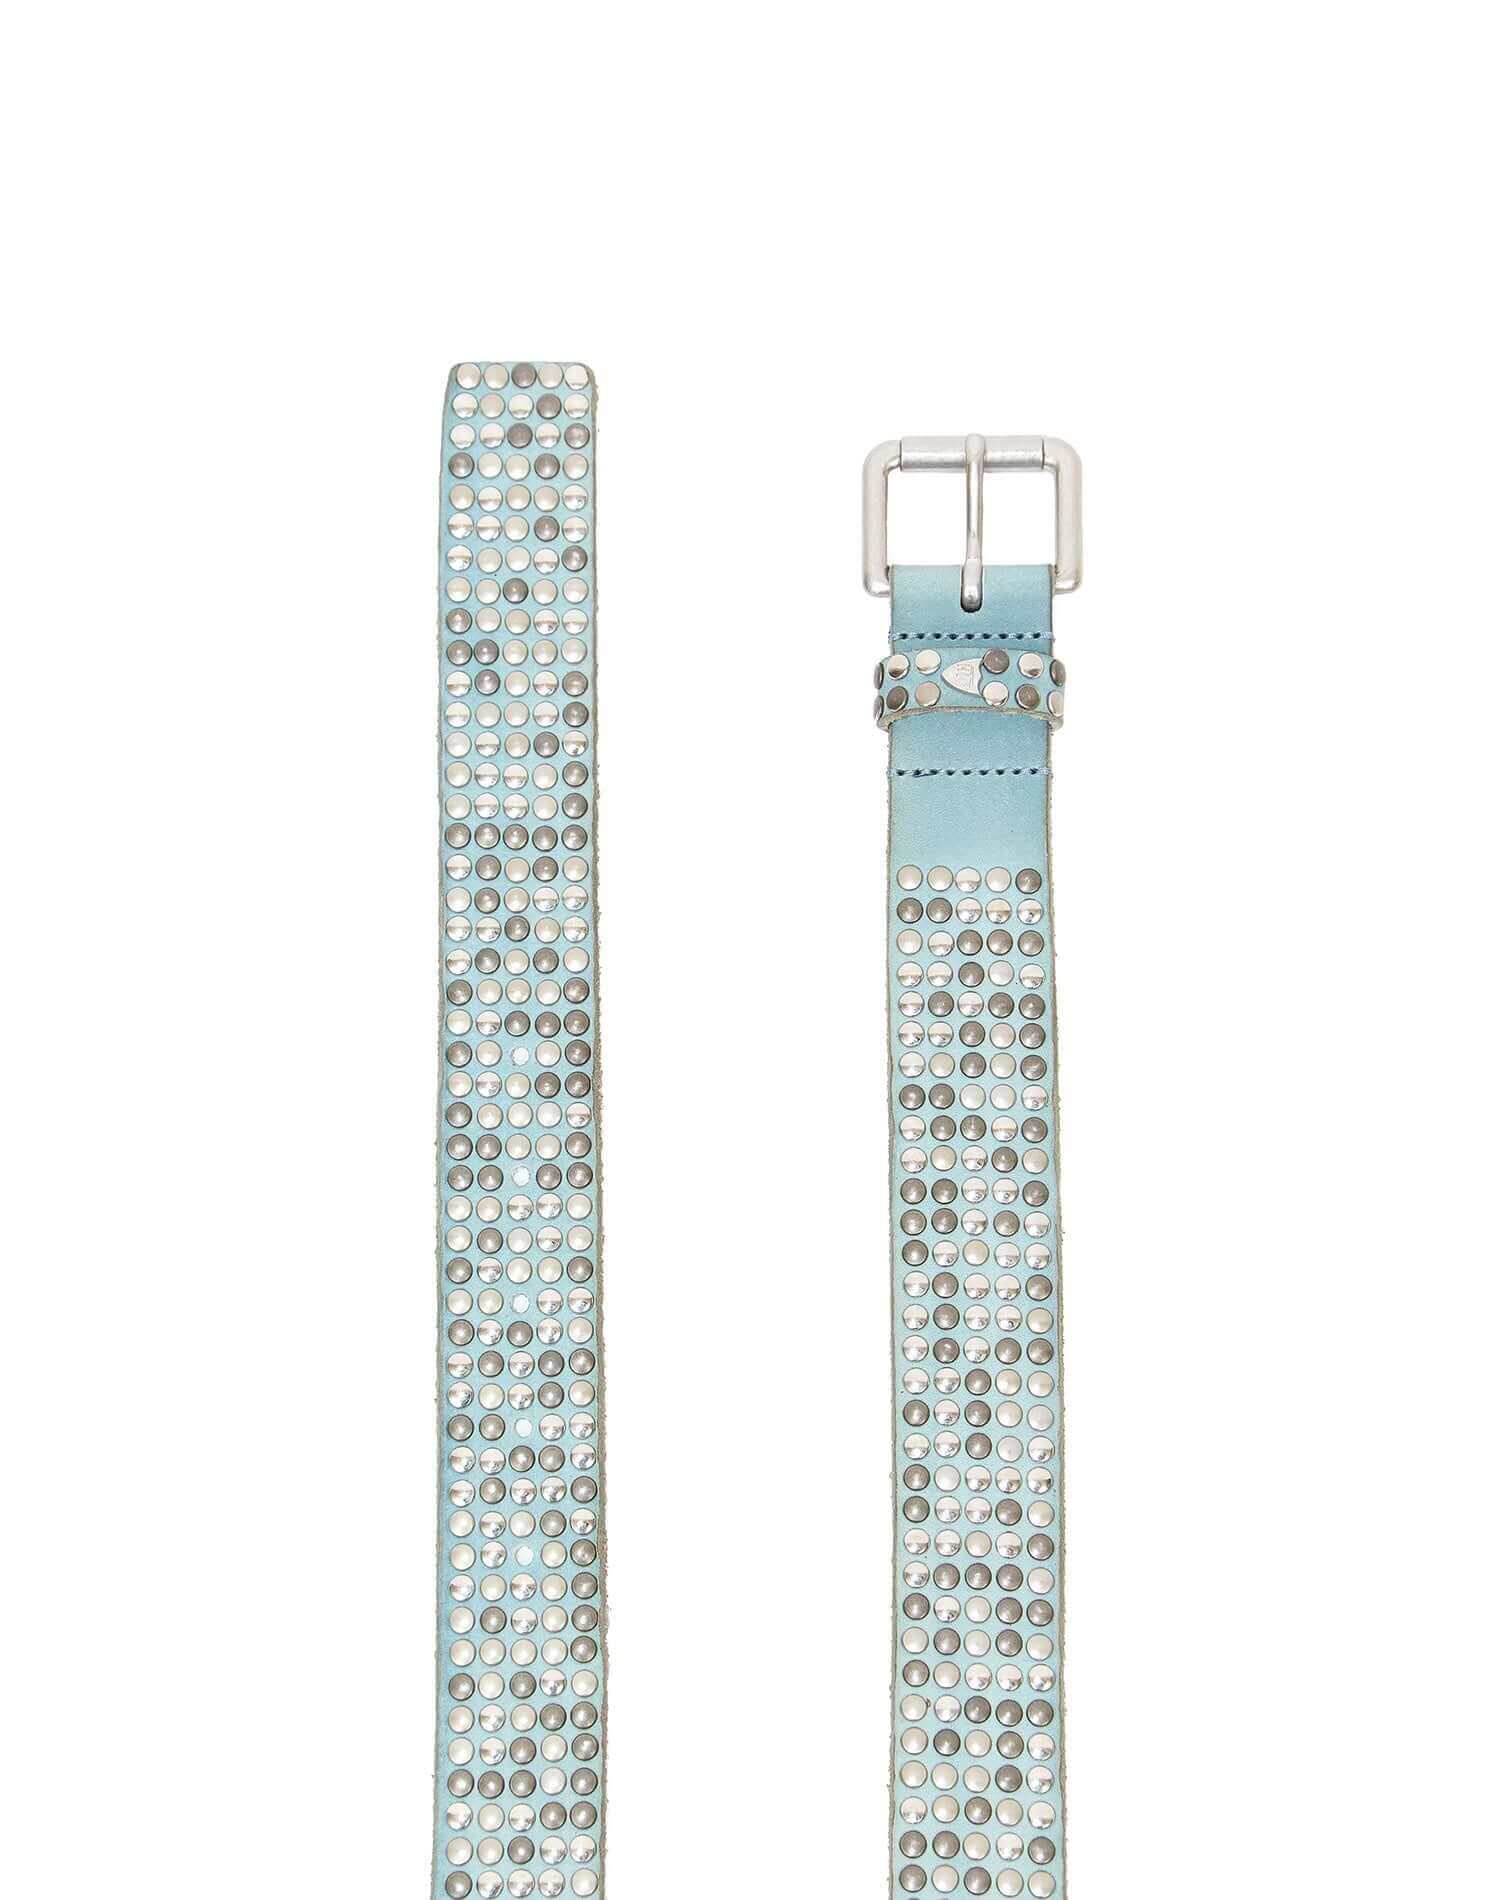 5.000 STUDS COLOR BELT LIght blue leather belt with mixed studs, brass buckle, studded zamac belt loop with HTC logo rivet. Height: 3.5 cm. Made in Italy. HTC LOS ANGELES